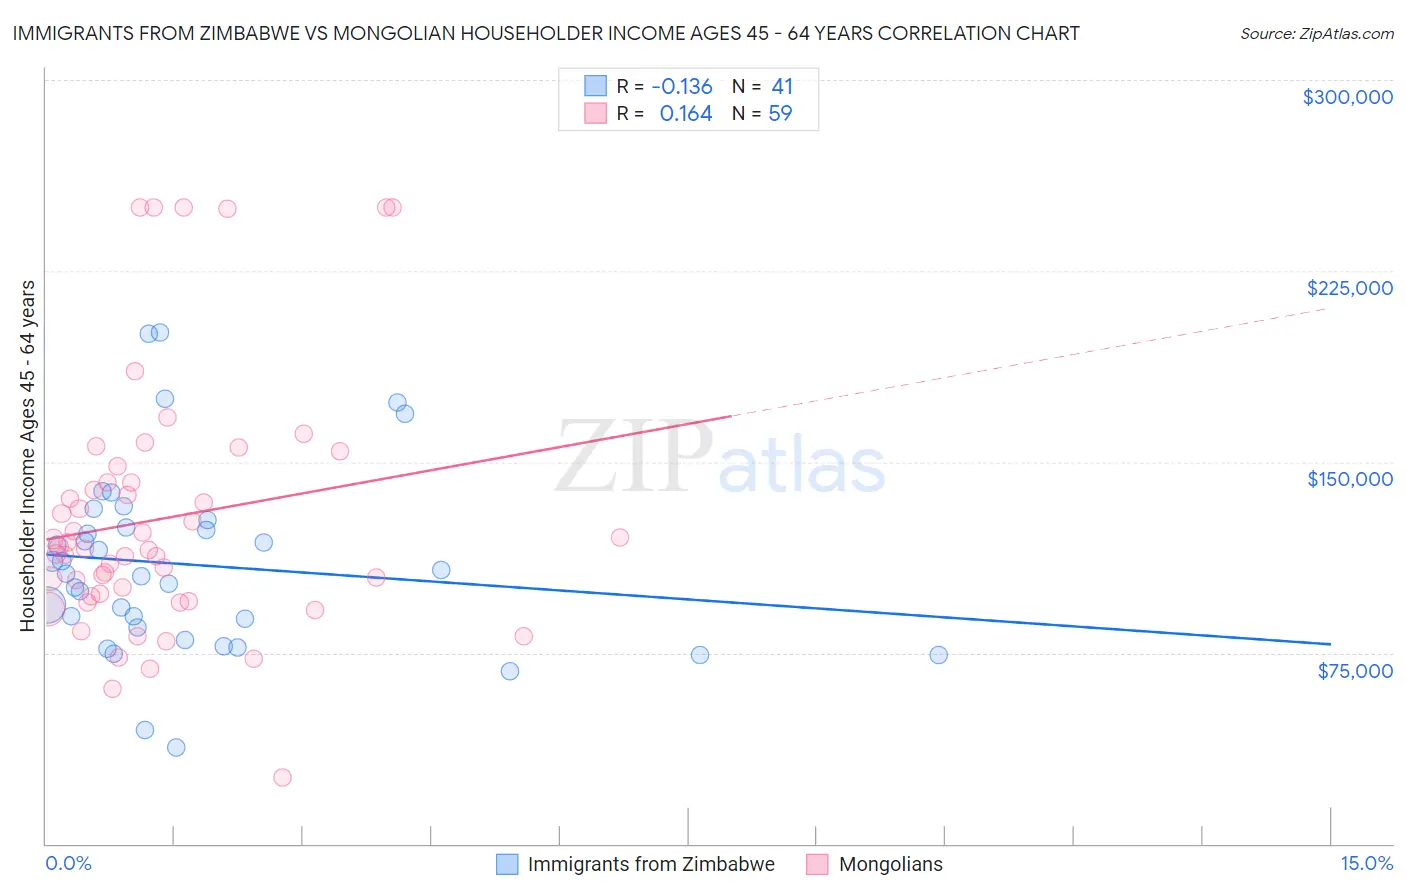 Immigrants from Zimbabwe vs Mongolian Householder Income Ages 45 - 64 years